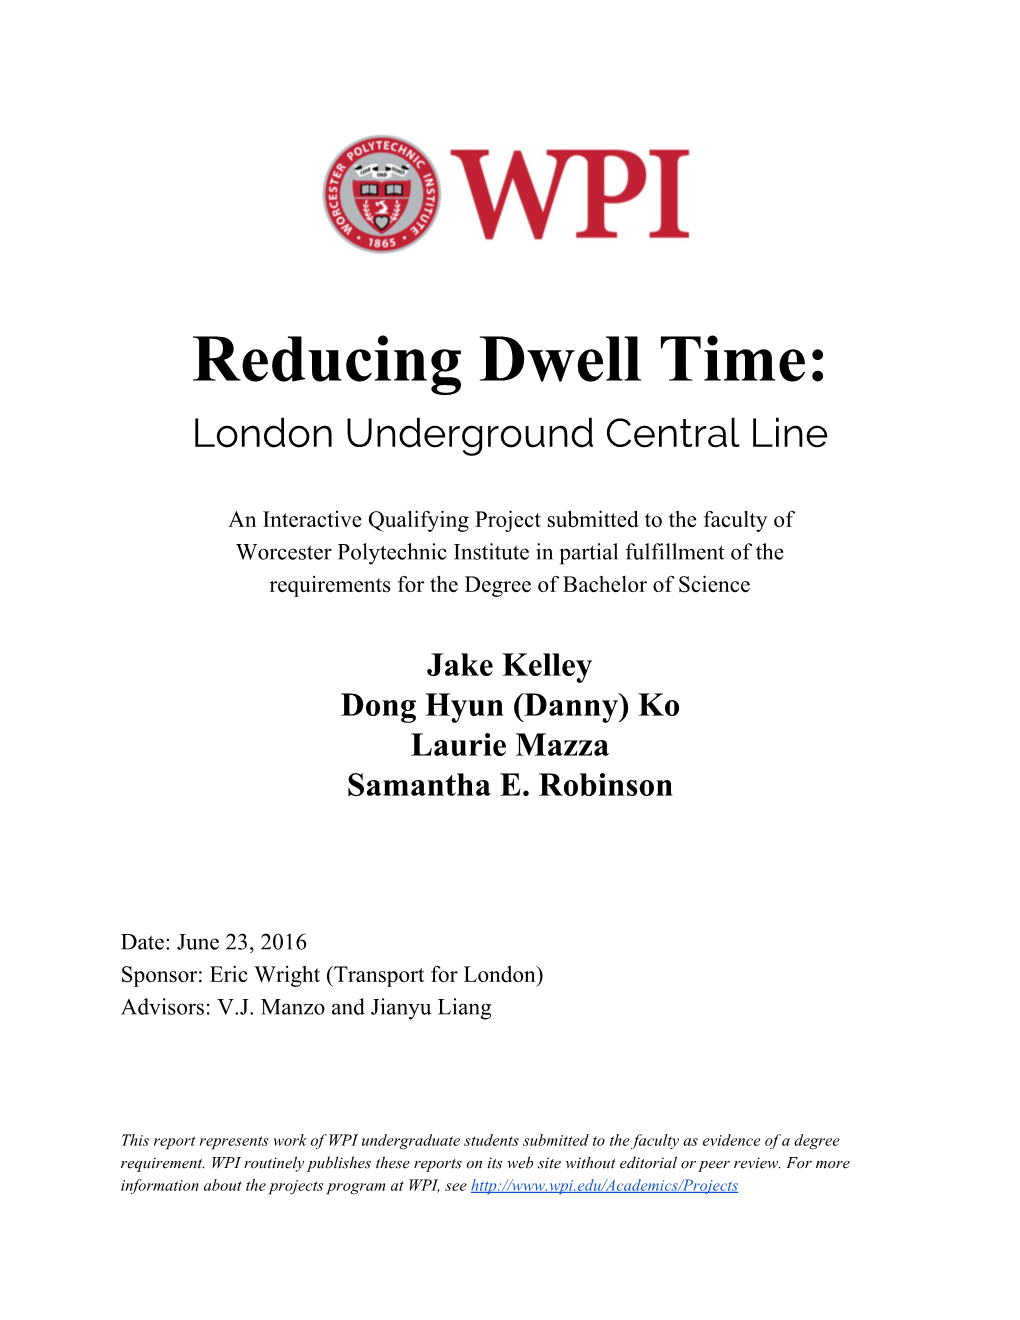 Reducing Dwell Time: London Underground Central Line